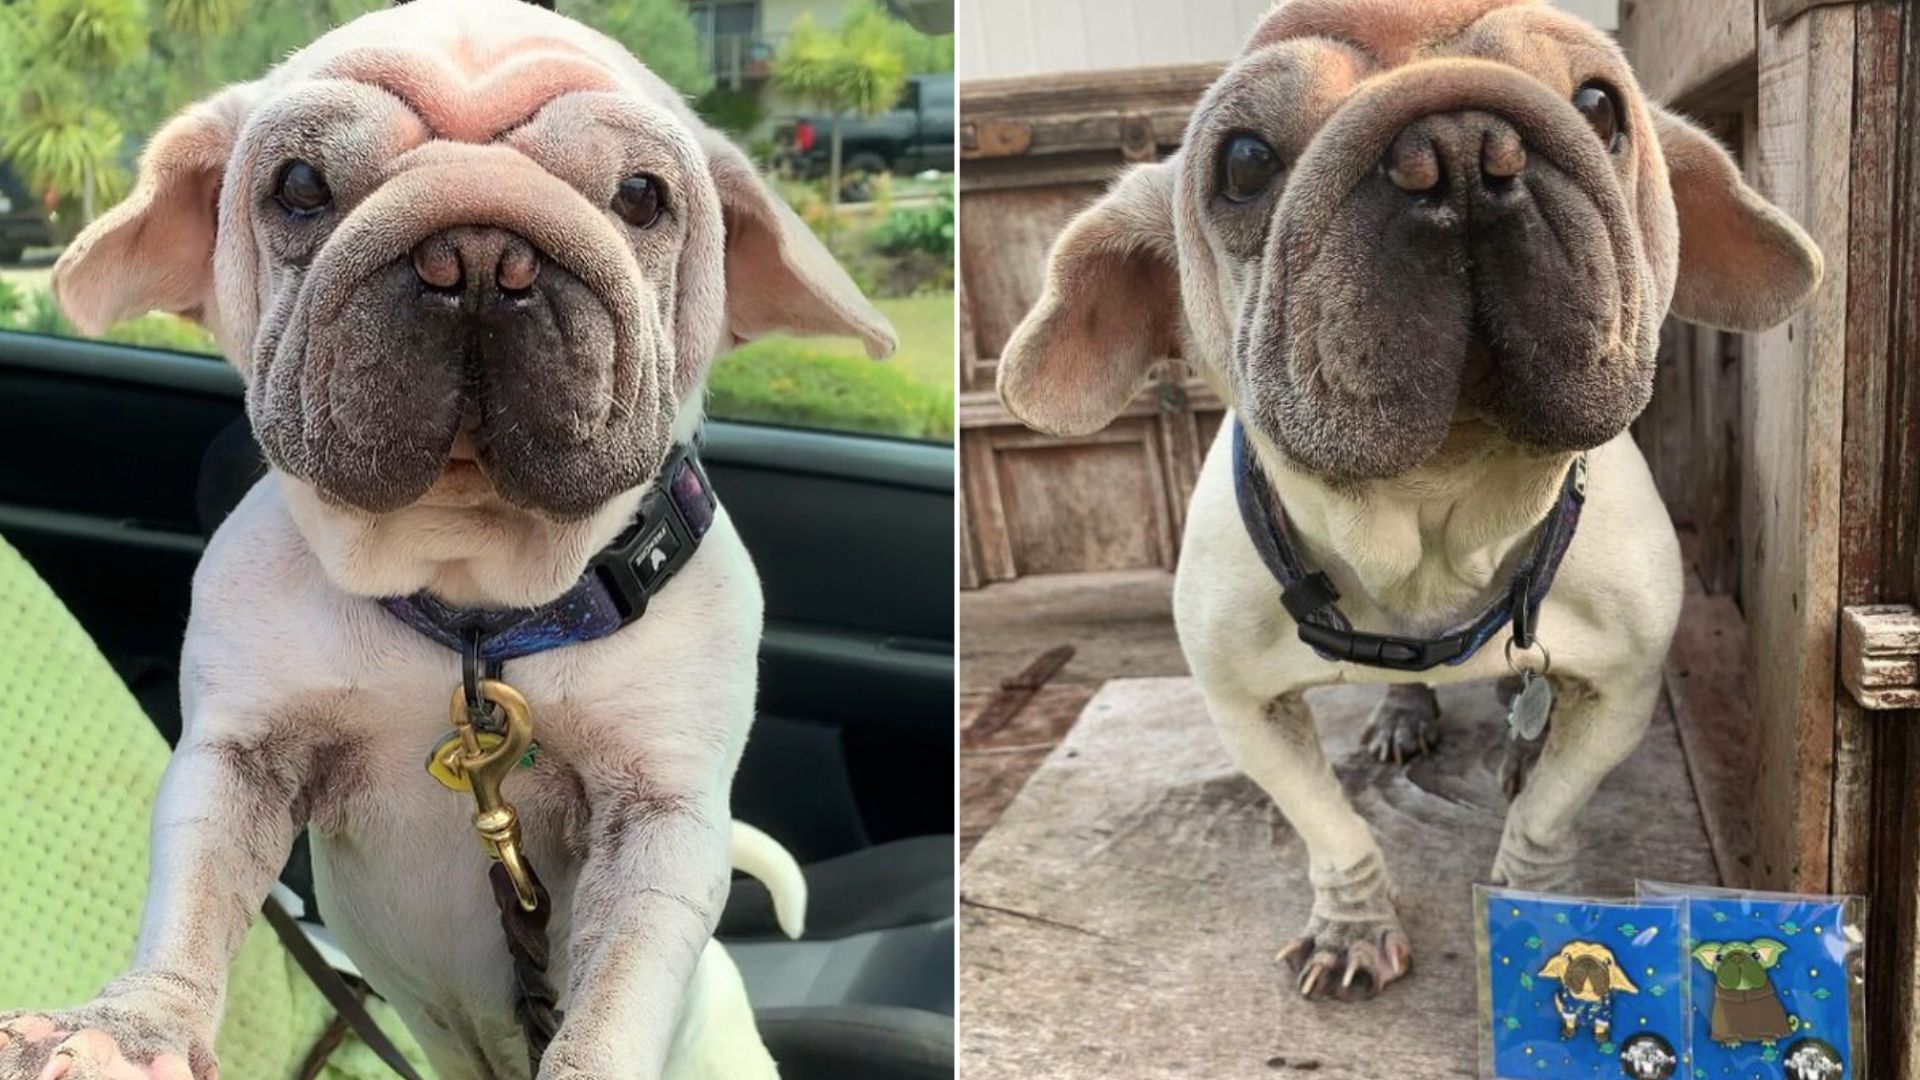 Mork Skywalker, The Pawdorable Rescue Dog, Looks Just Like Baby Yoda